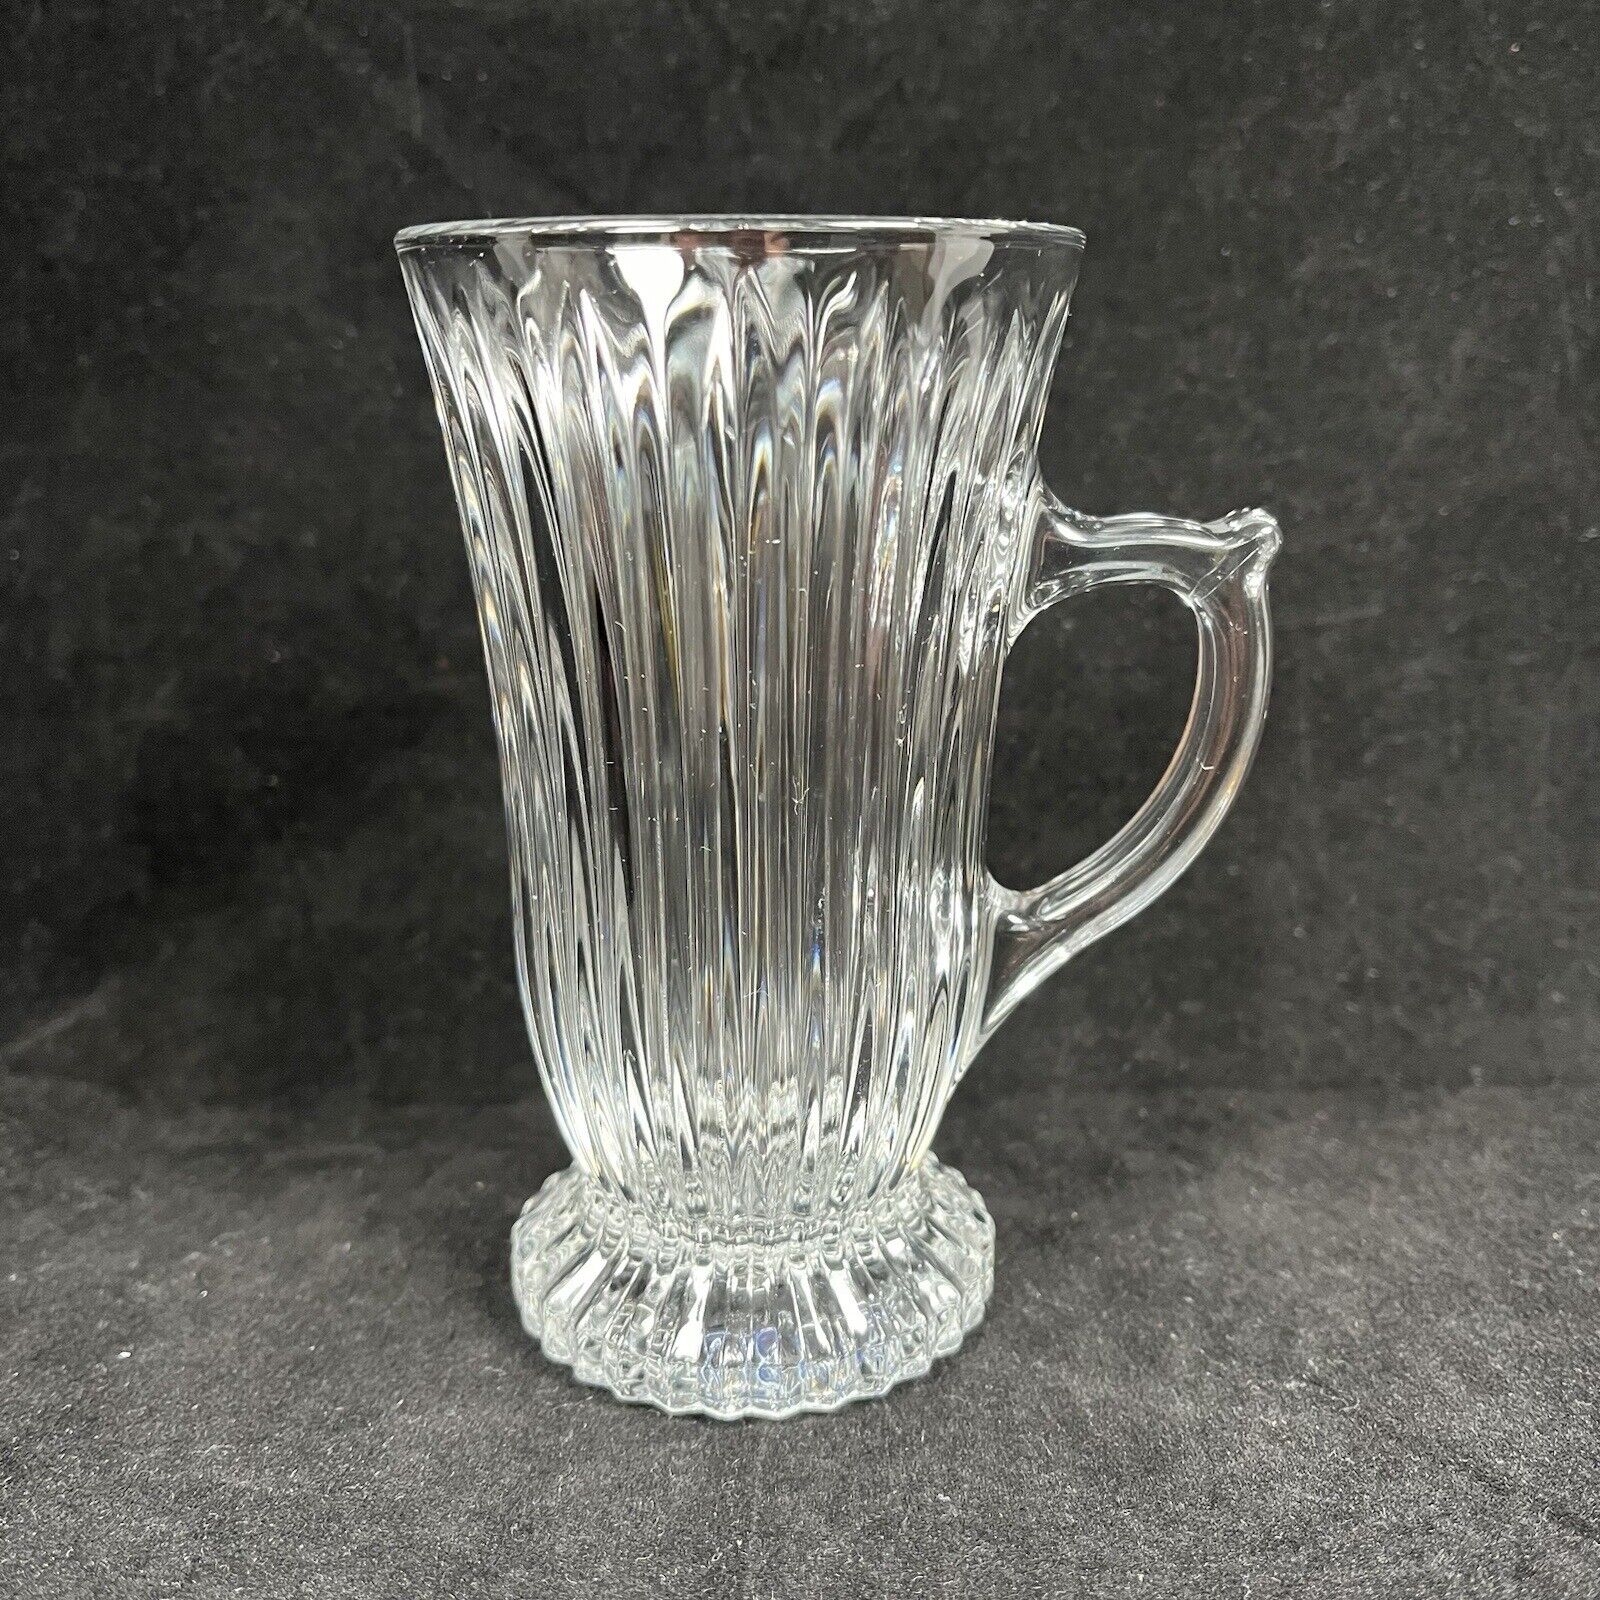 Aderia Glass Crystal Espresso Cup Footed Irish Coffee 4.75” Vintage 1960s Japan